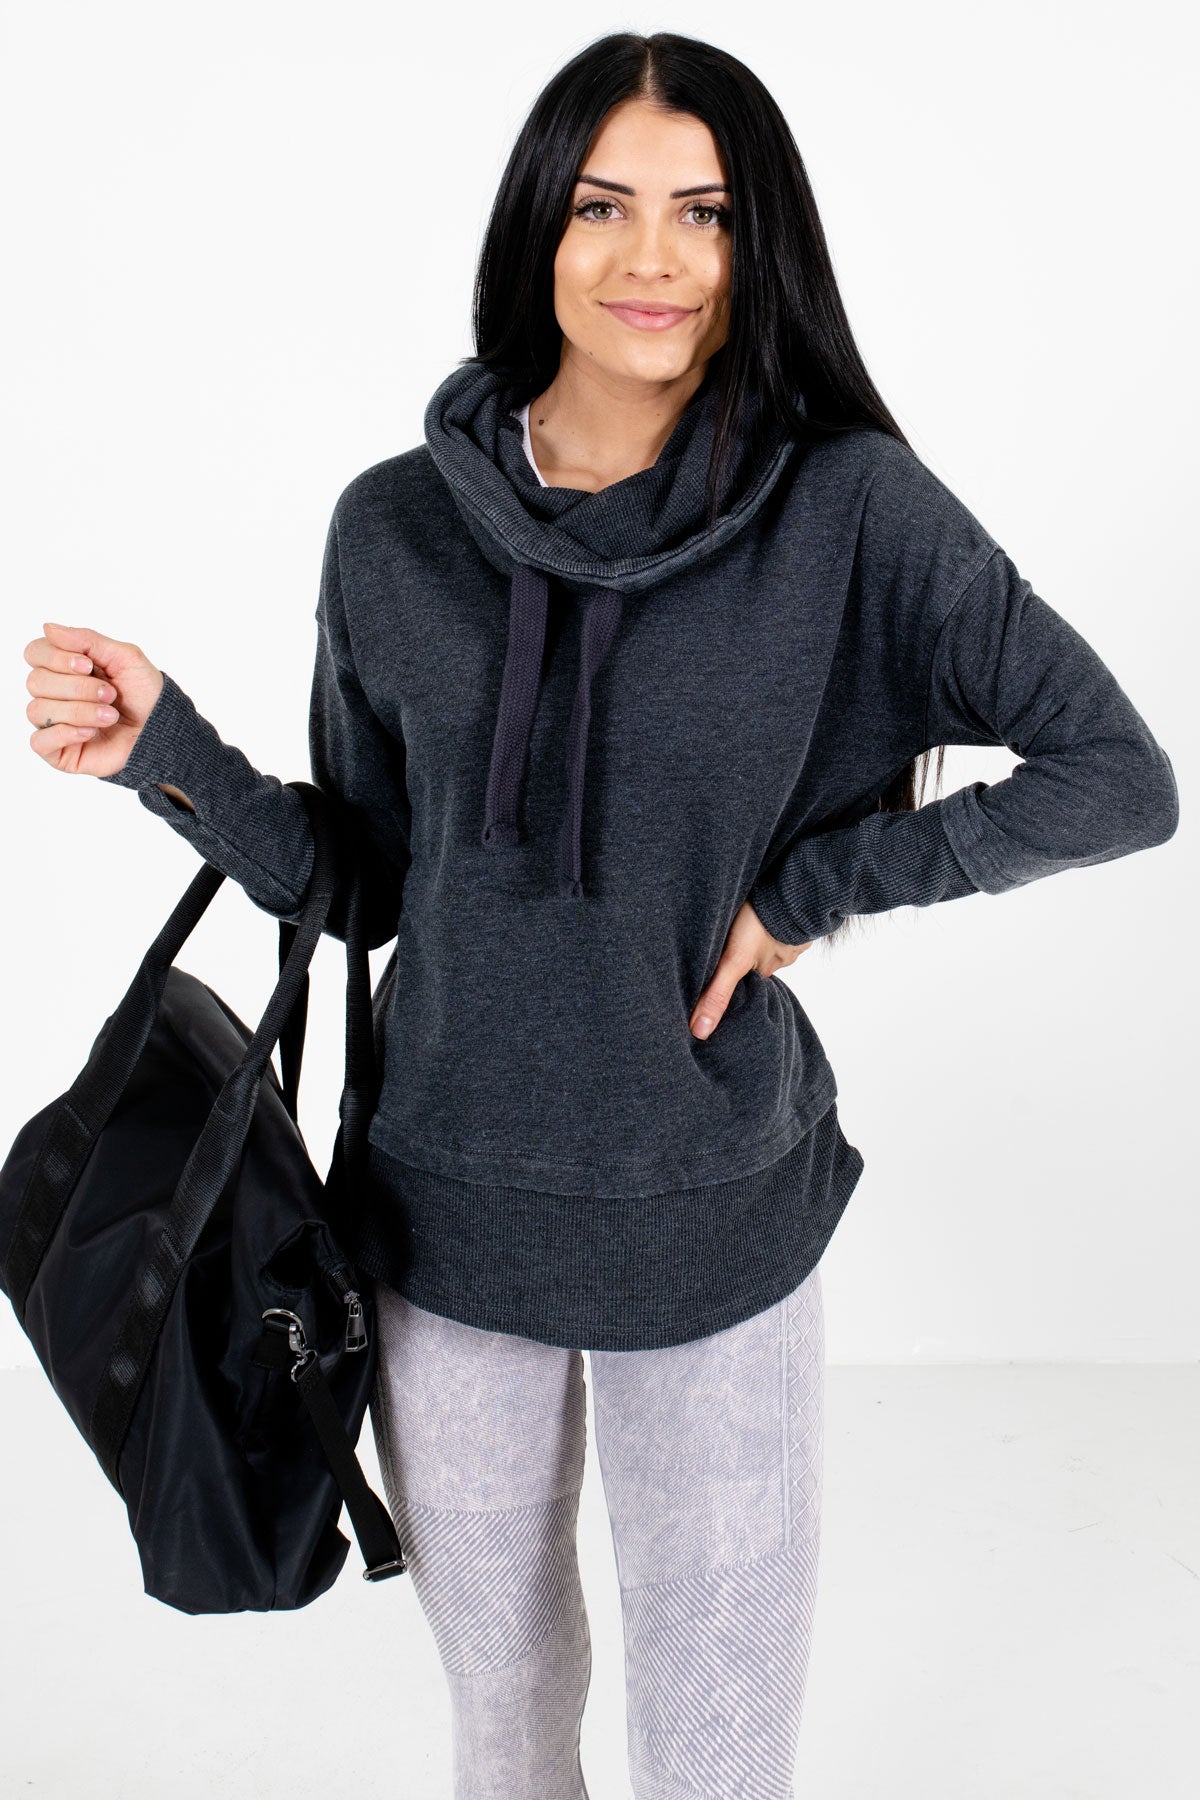 Women's Warm and Cozy Charcoal Gray Active Hoodie